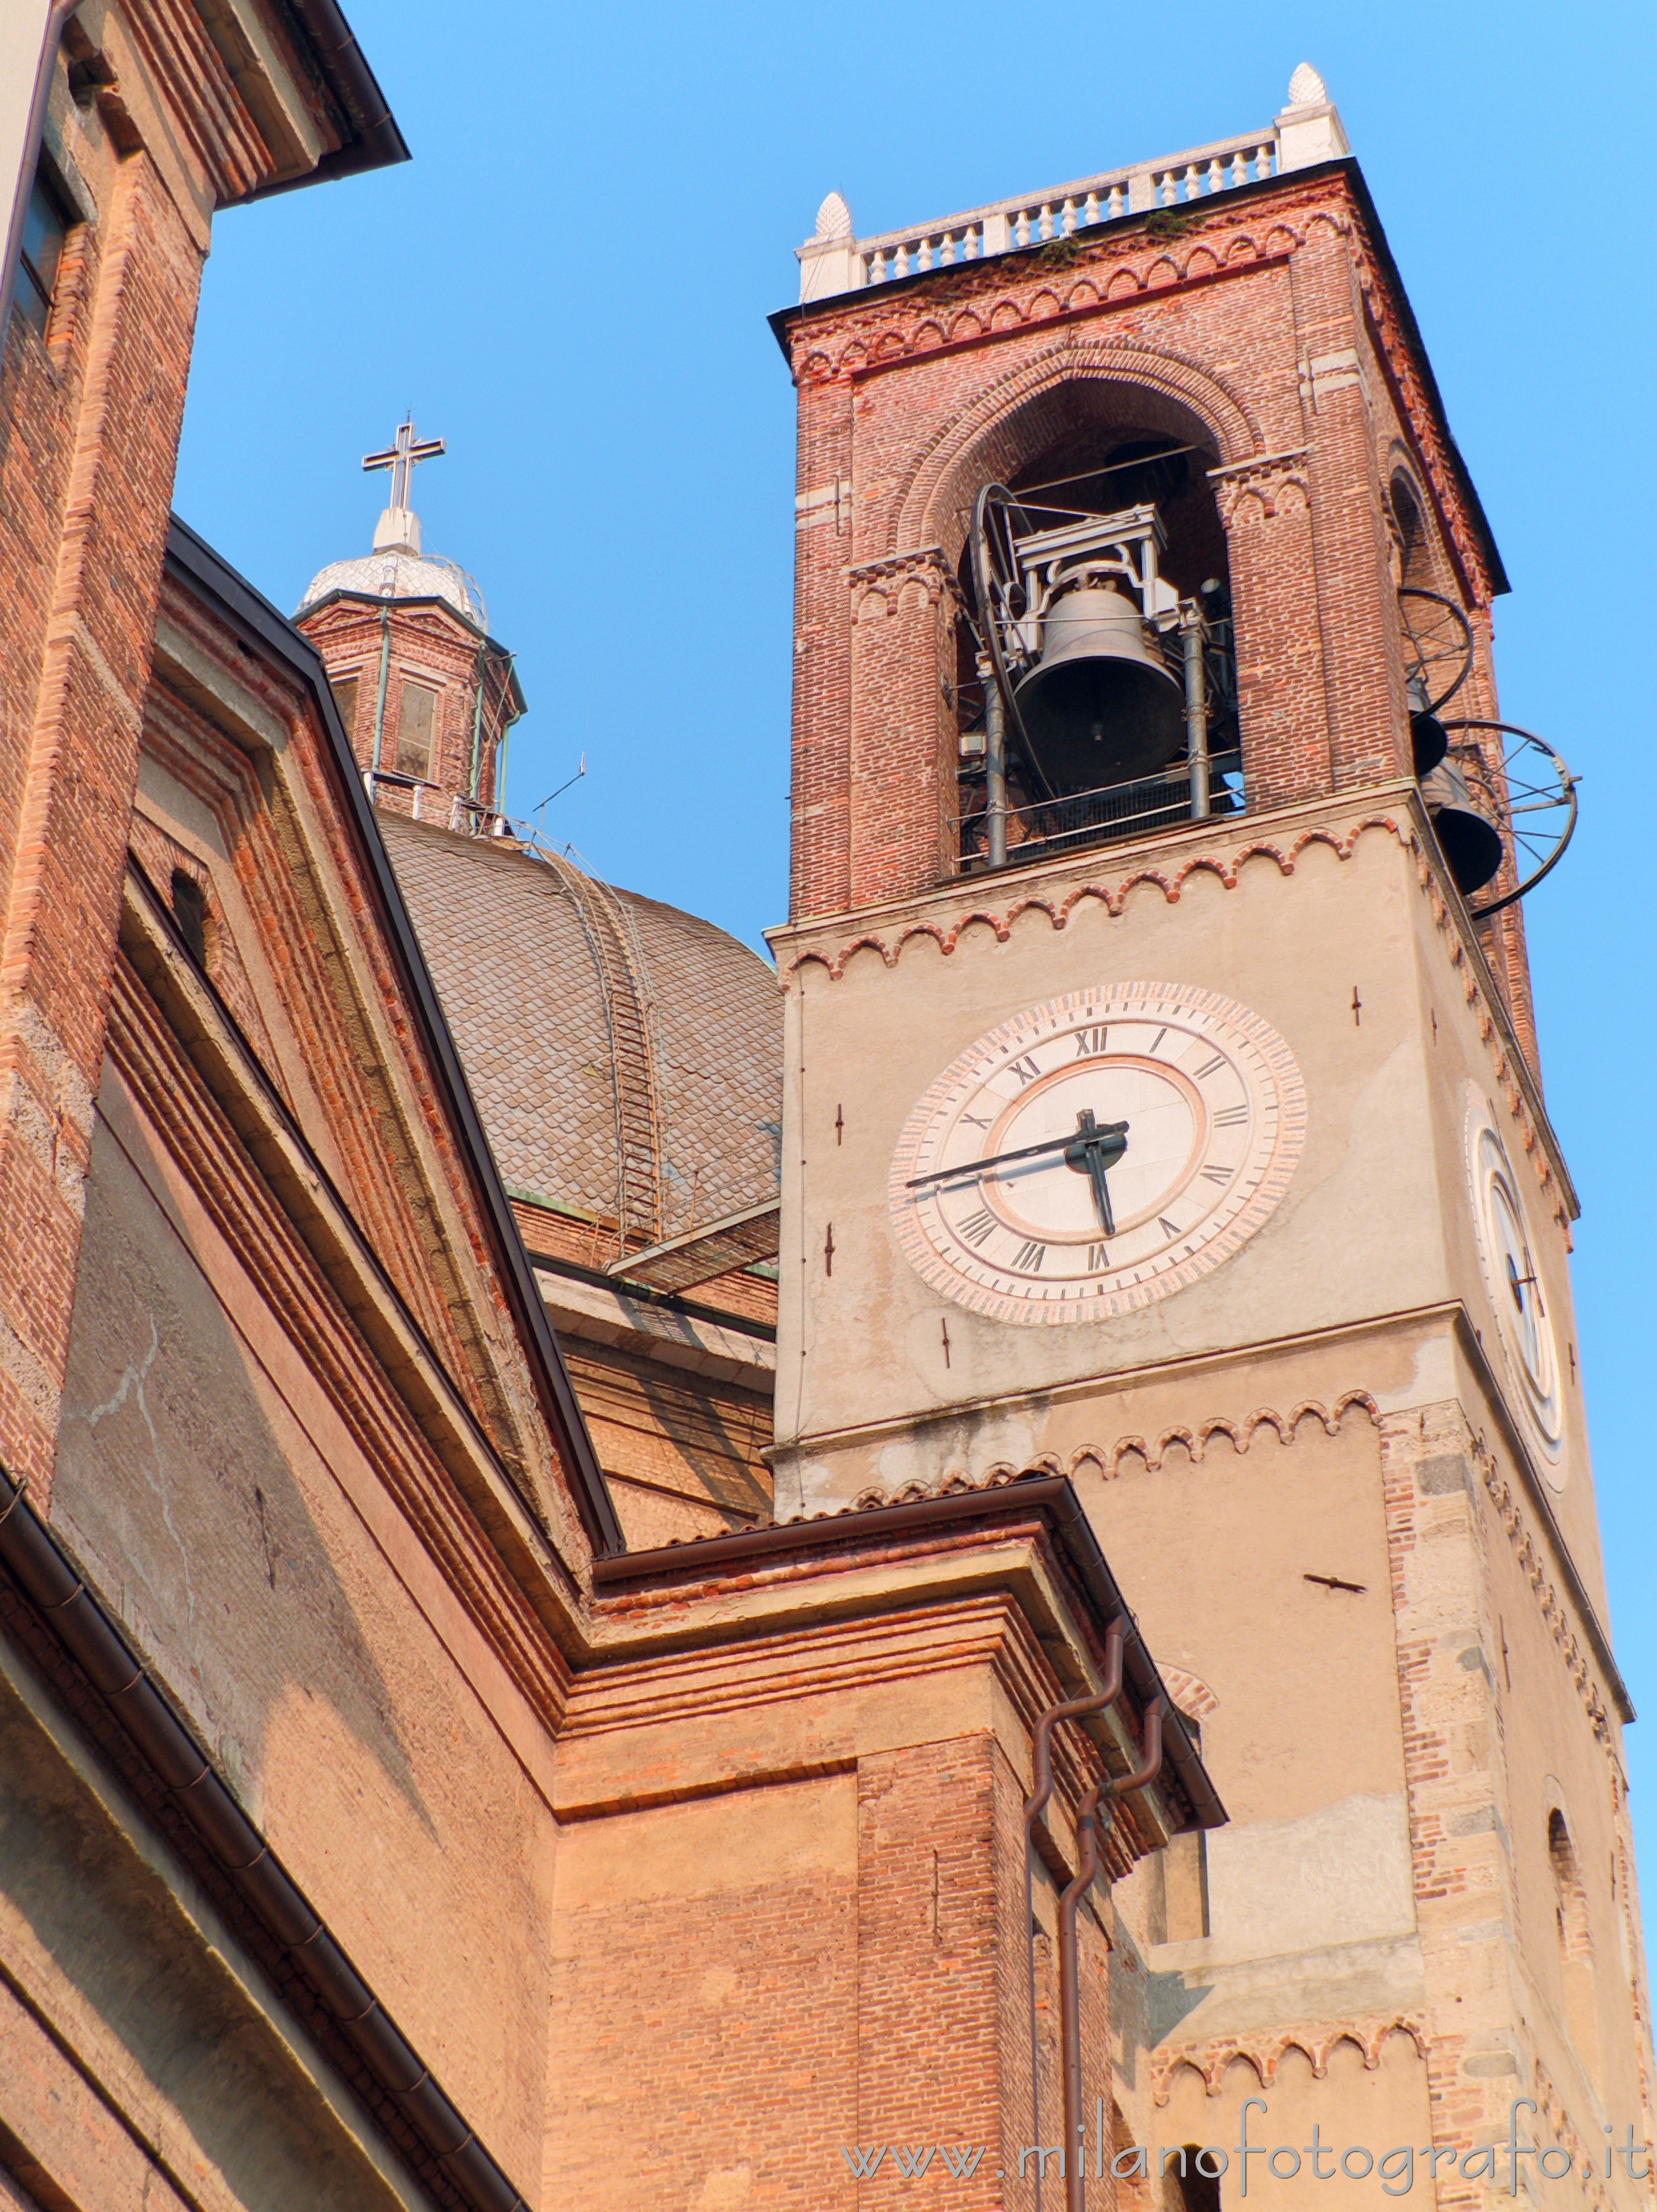 Desio (Milan, Italy): Bell tower of the Basilica of the Saints Siro and Materno - Desio (Milan, Italy)